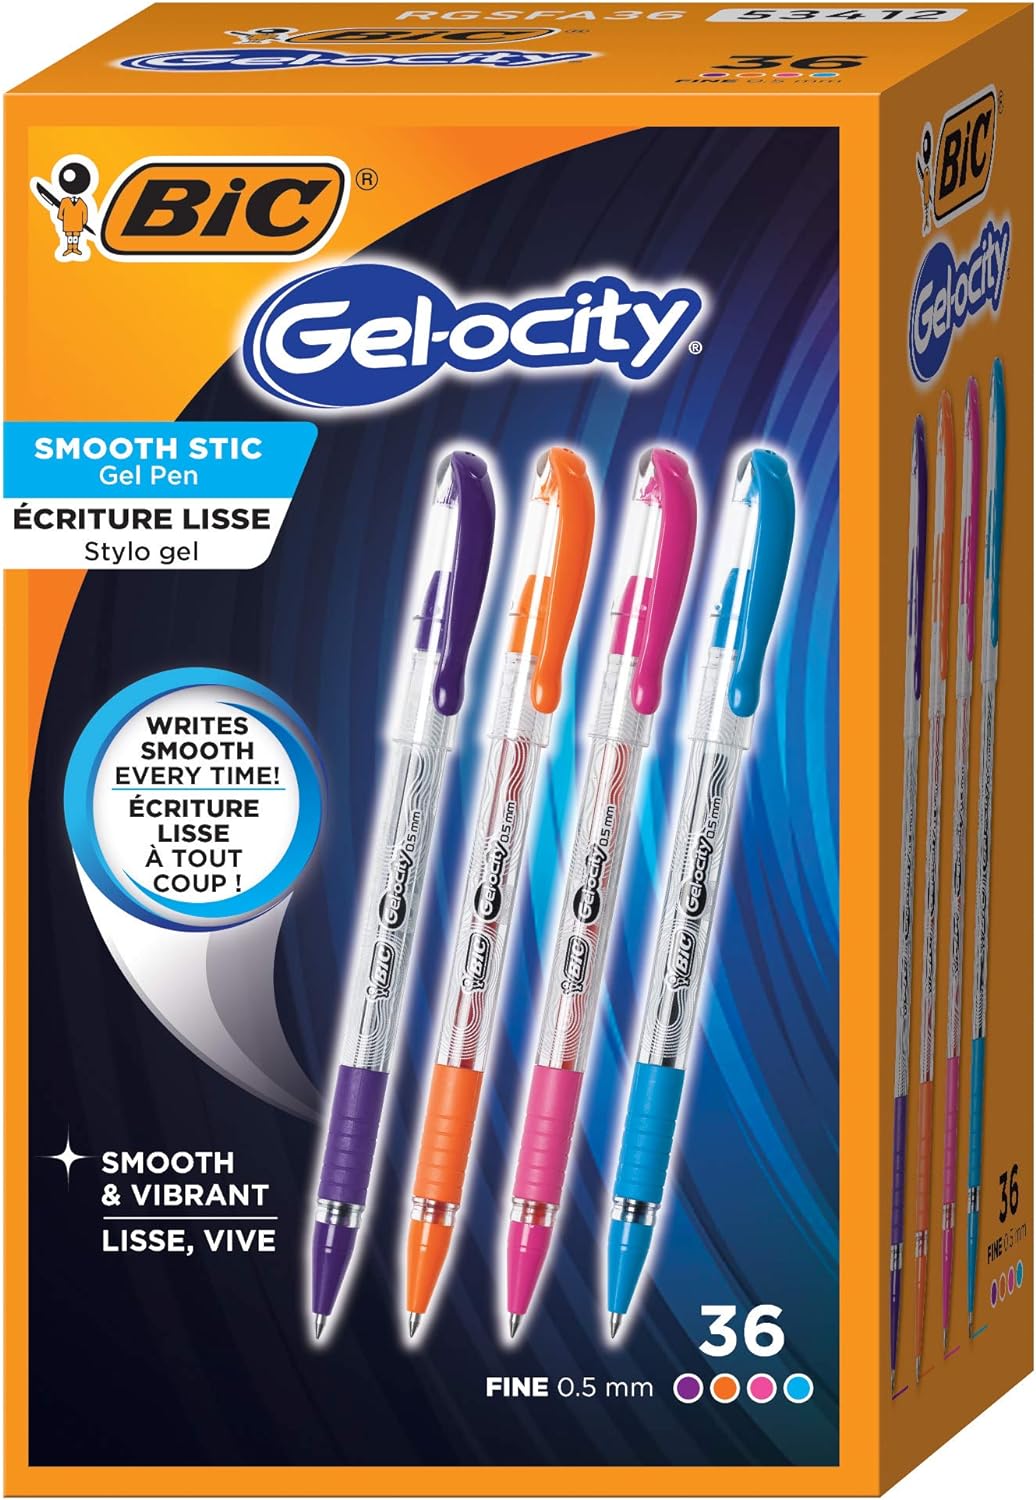 BIC Gelocity Smooth Gel Pens, Fine Point (0.5mm), Assorted Colors, For a Smooth Writing Experience, 36-Count (Pack of 1) (RGSFA36-A-AST)